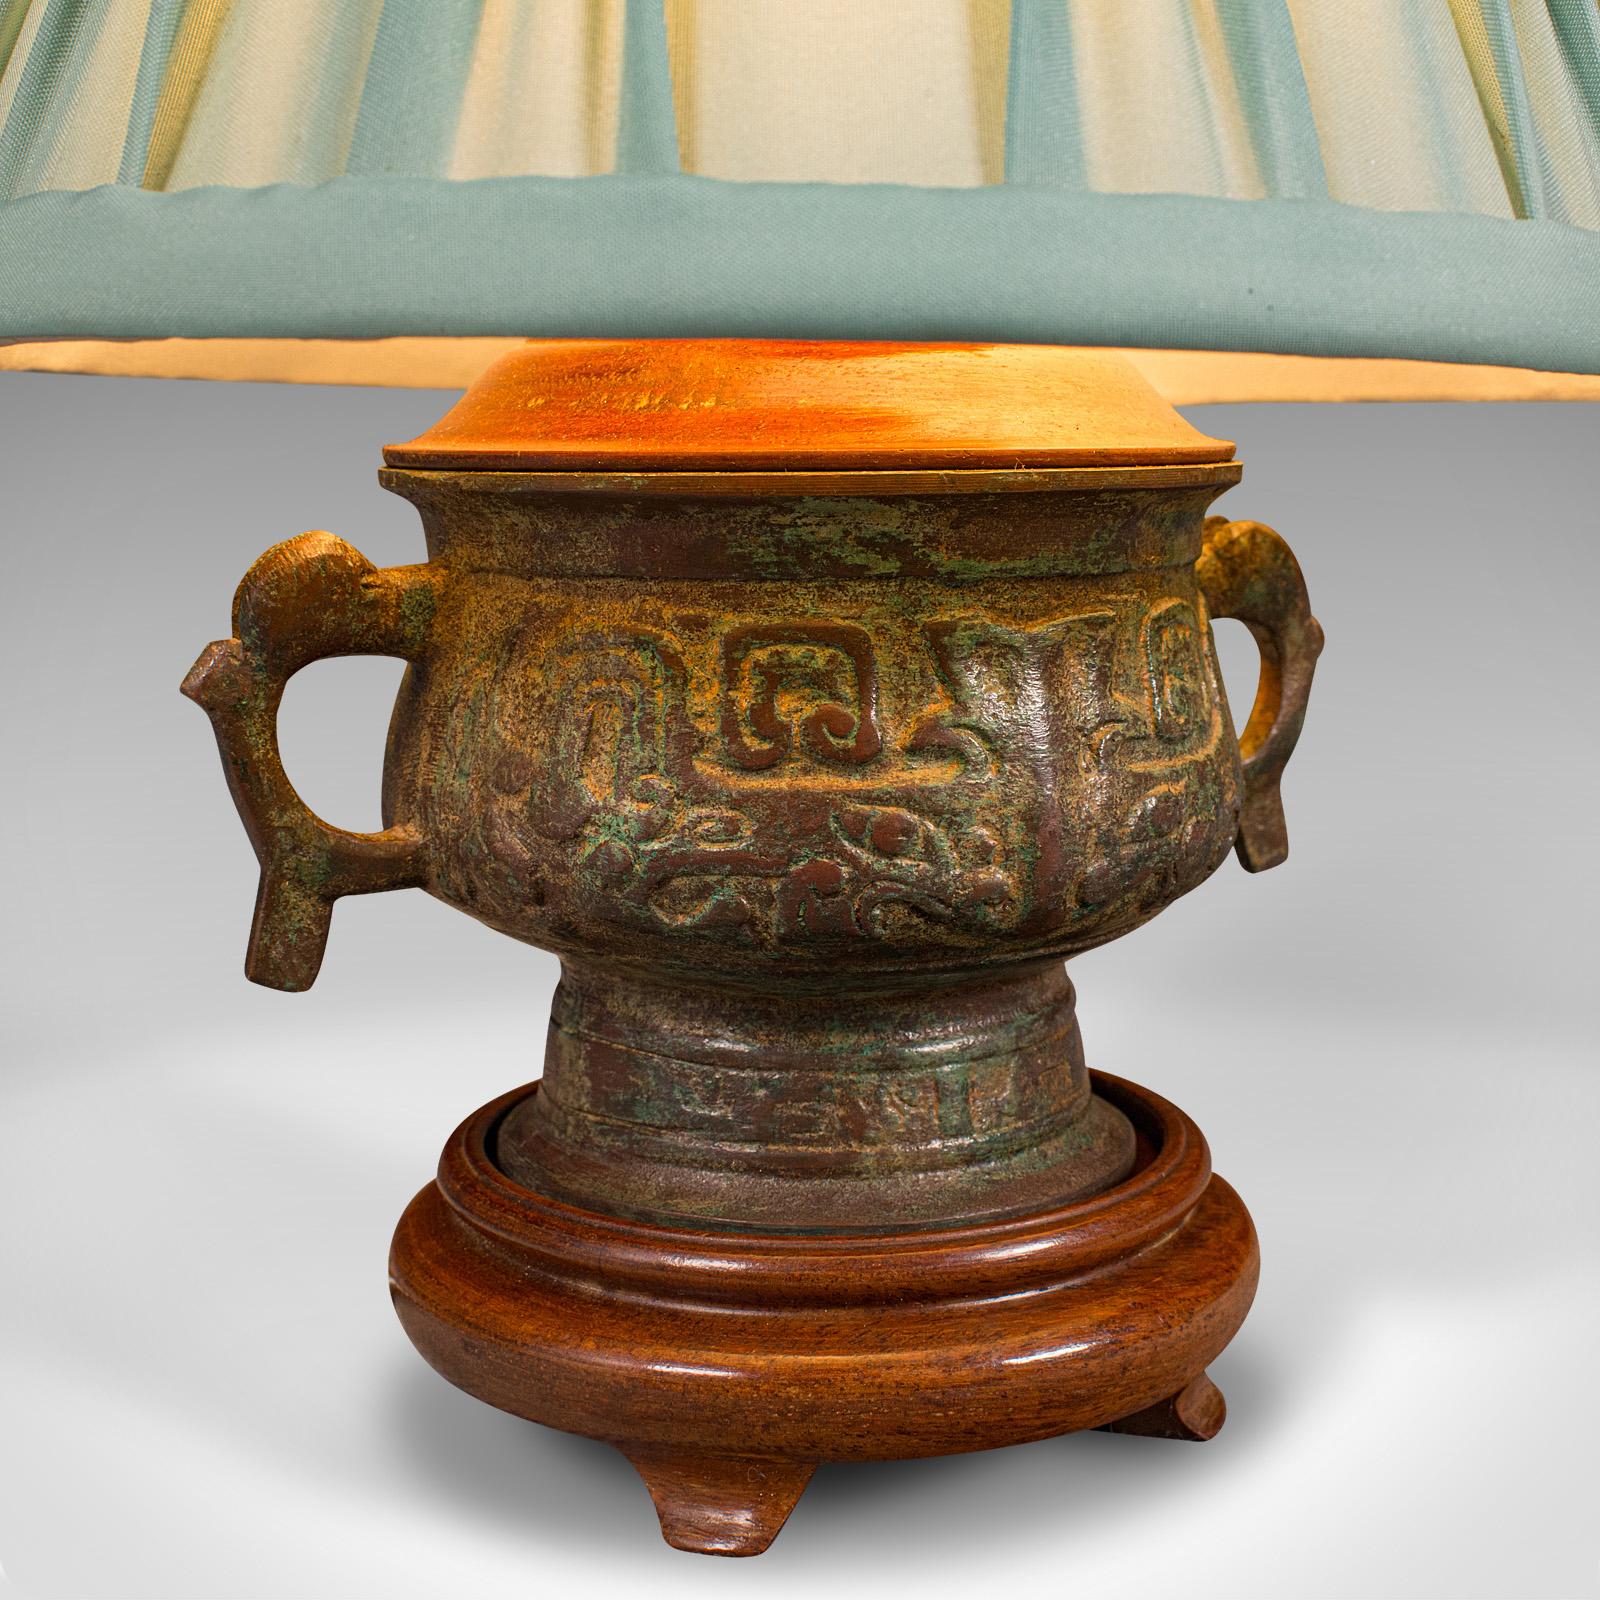 Small Vintage Side Lamp, Chinese, Bronze, Desk, Table Light, Decor, Circa 1970 For Sale 2